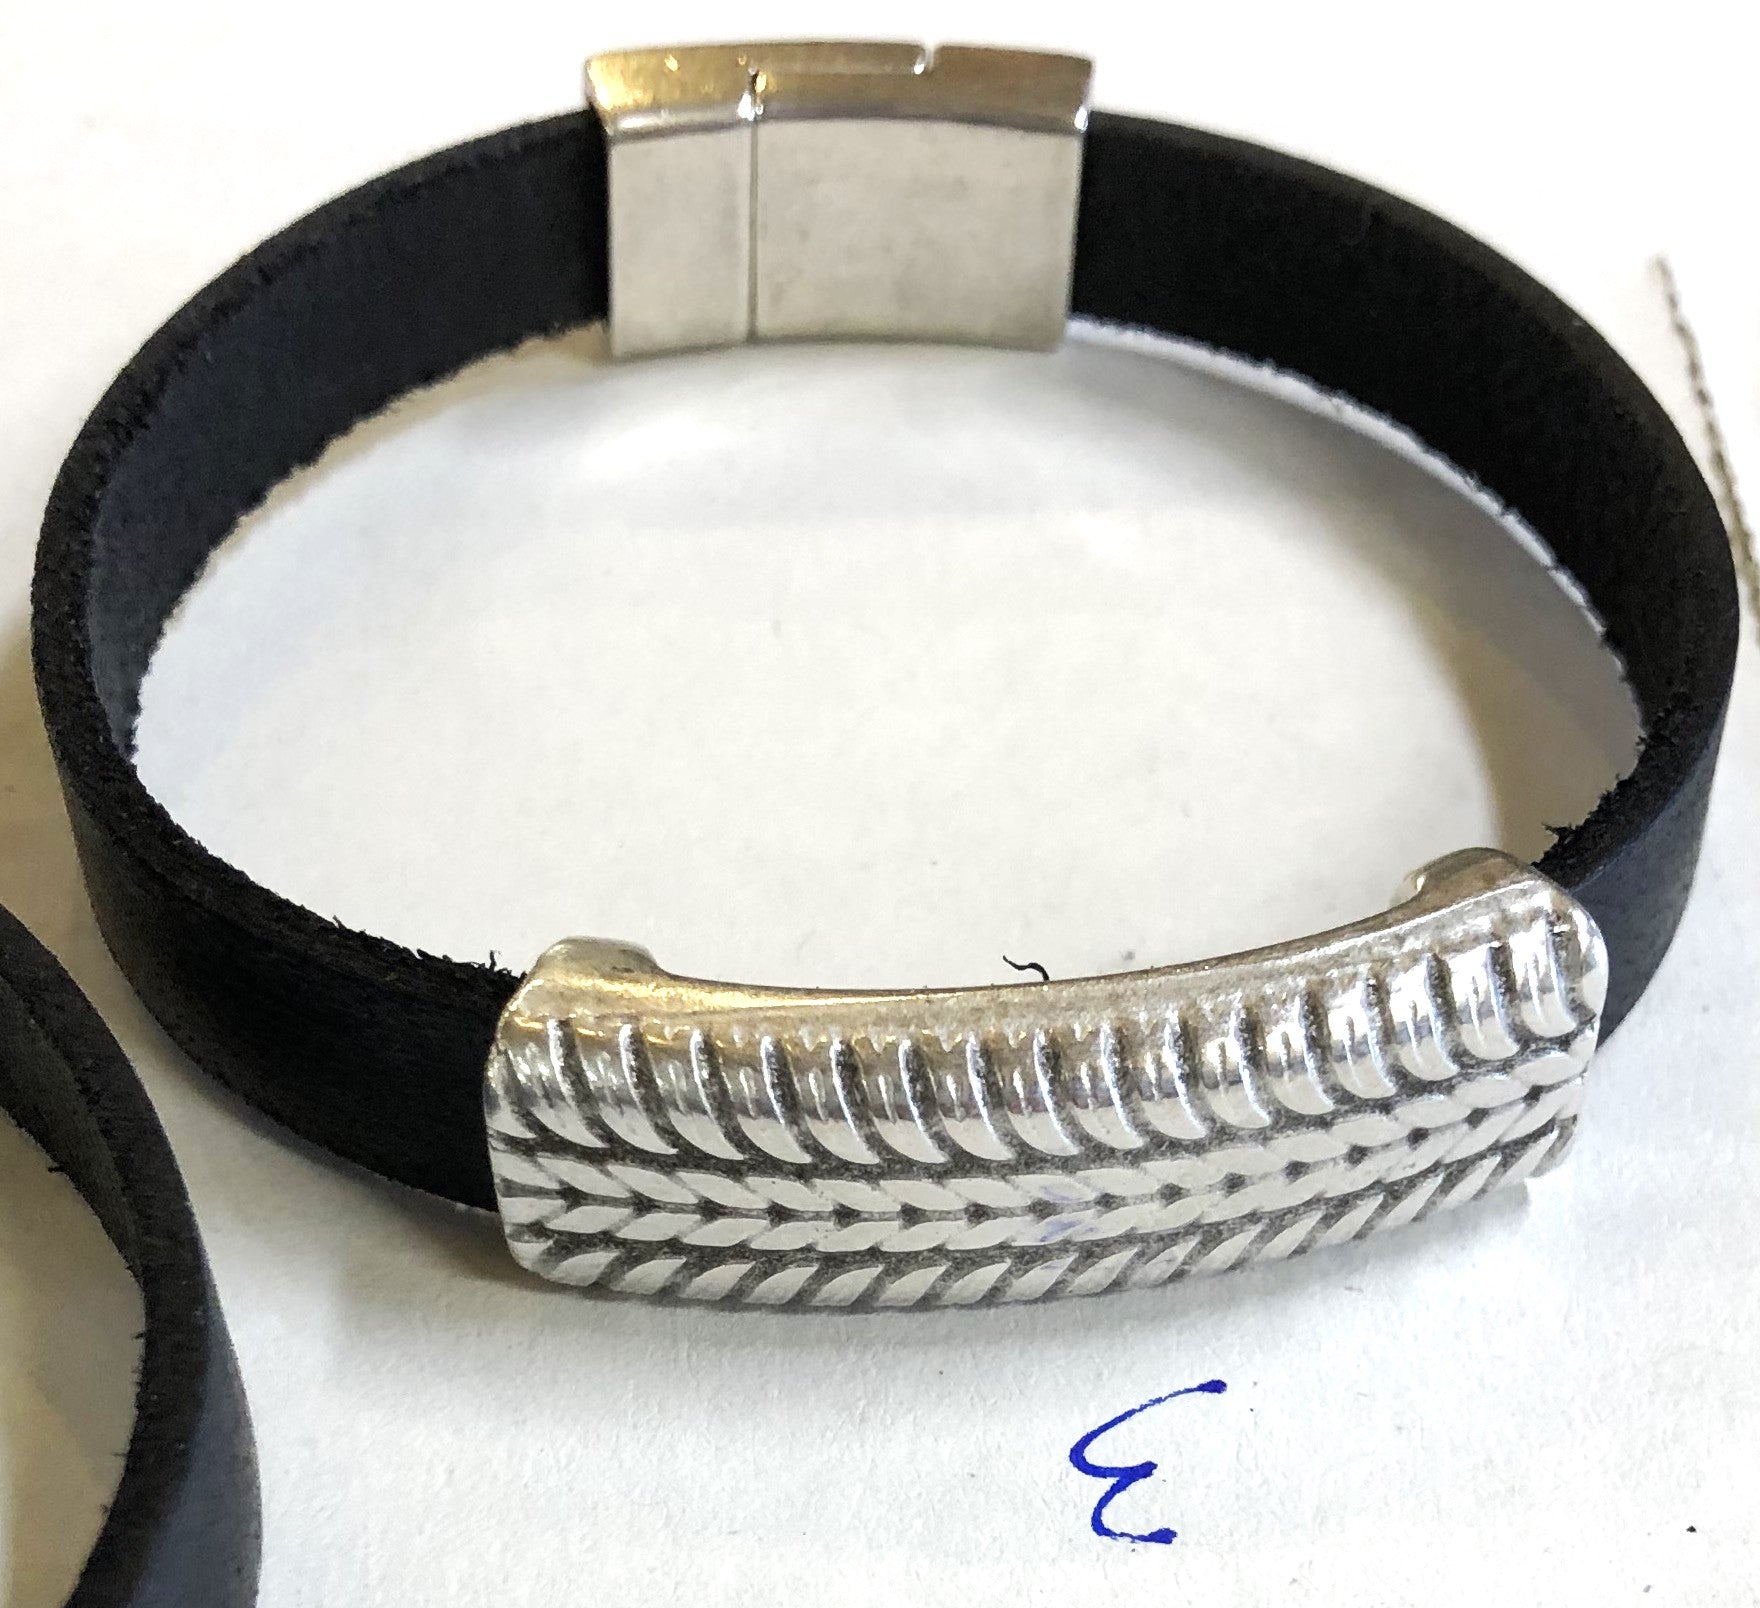 Cathy Crelling - Bracelets Crelling Bison Leather / Silver / Buffalo Nickel